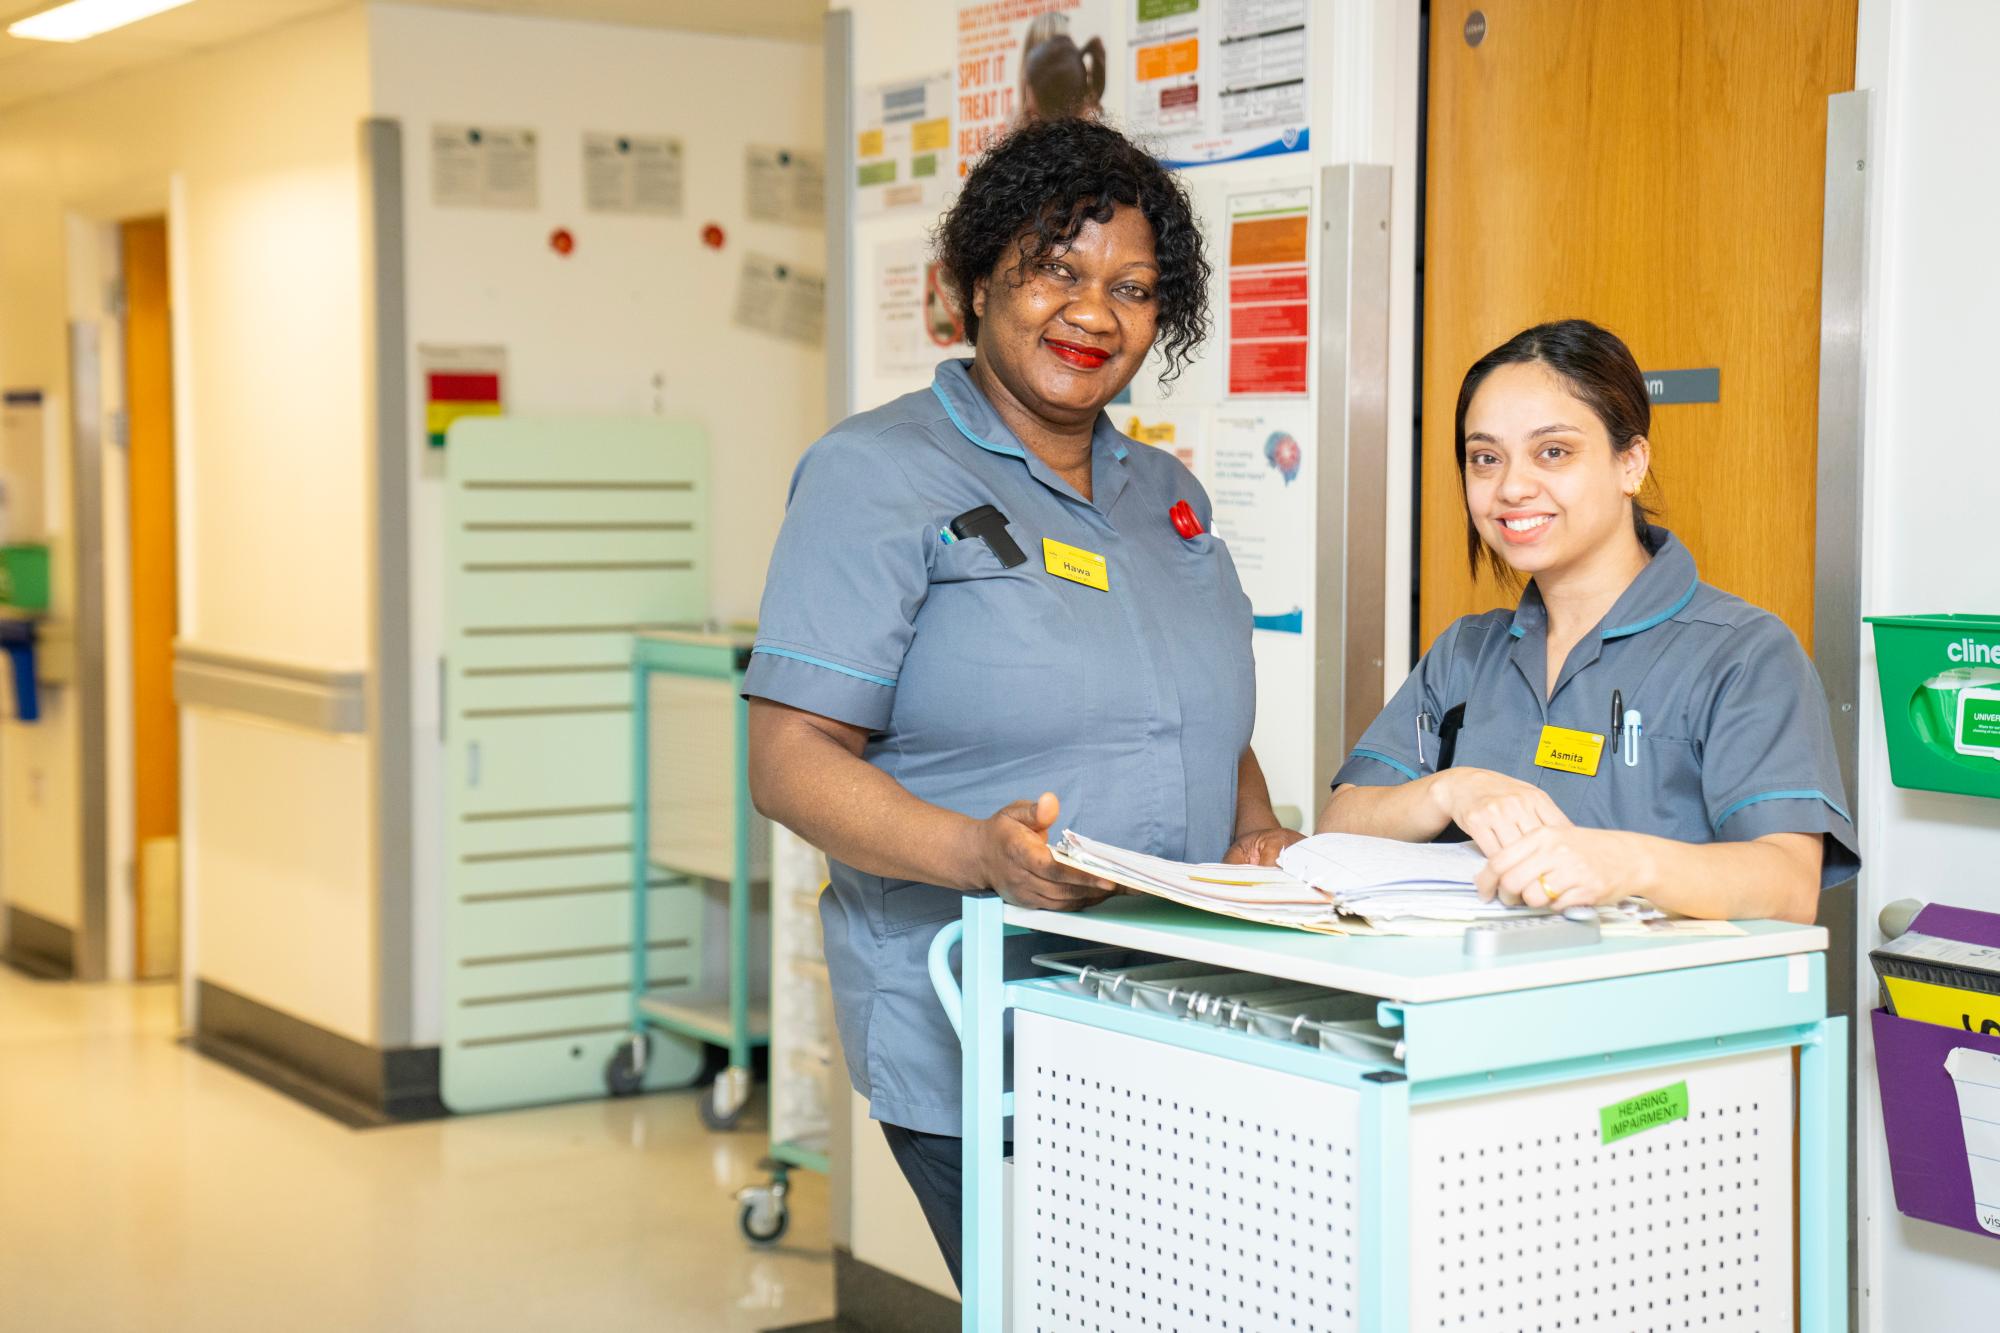 Nurses working in Frailty Unit at Queen's Hospital